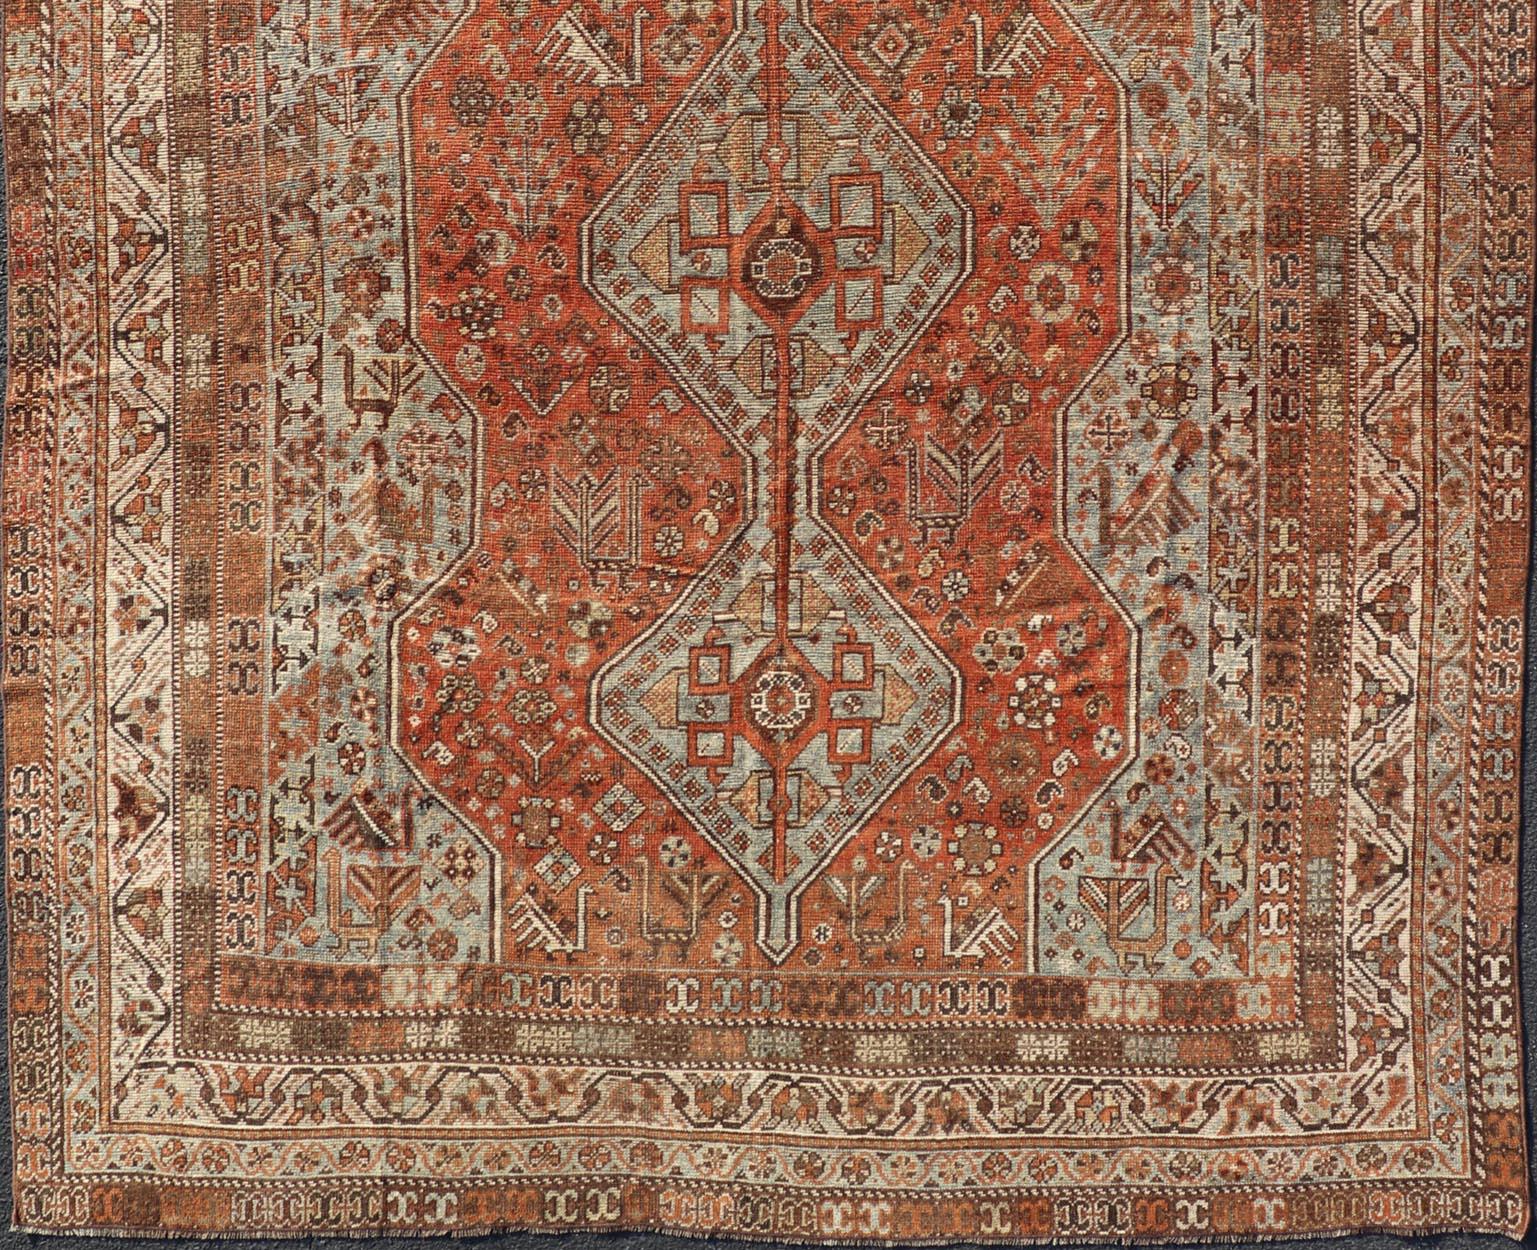 Wool Antique Persian Shiraz Rug With Medallions Geometric in Rusty Orange, Steel Blue For Sale